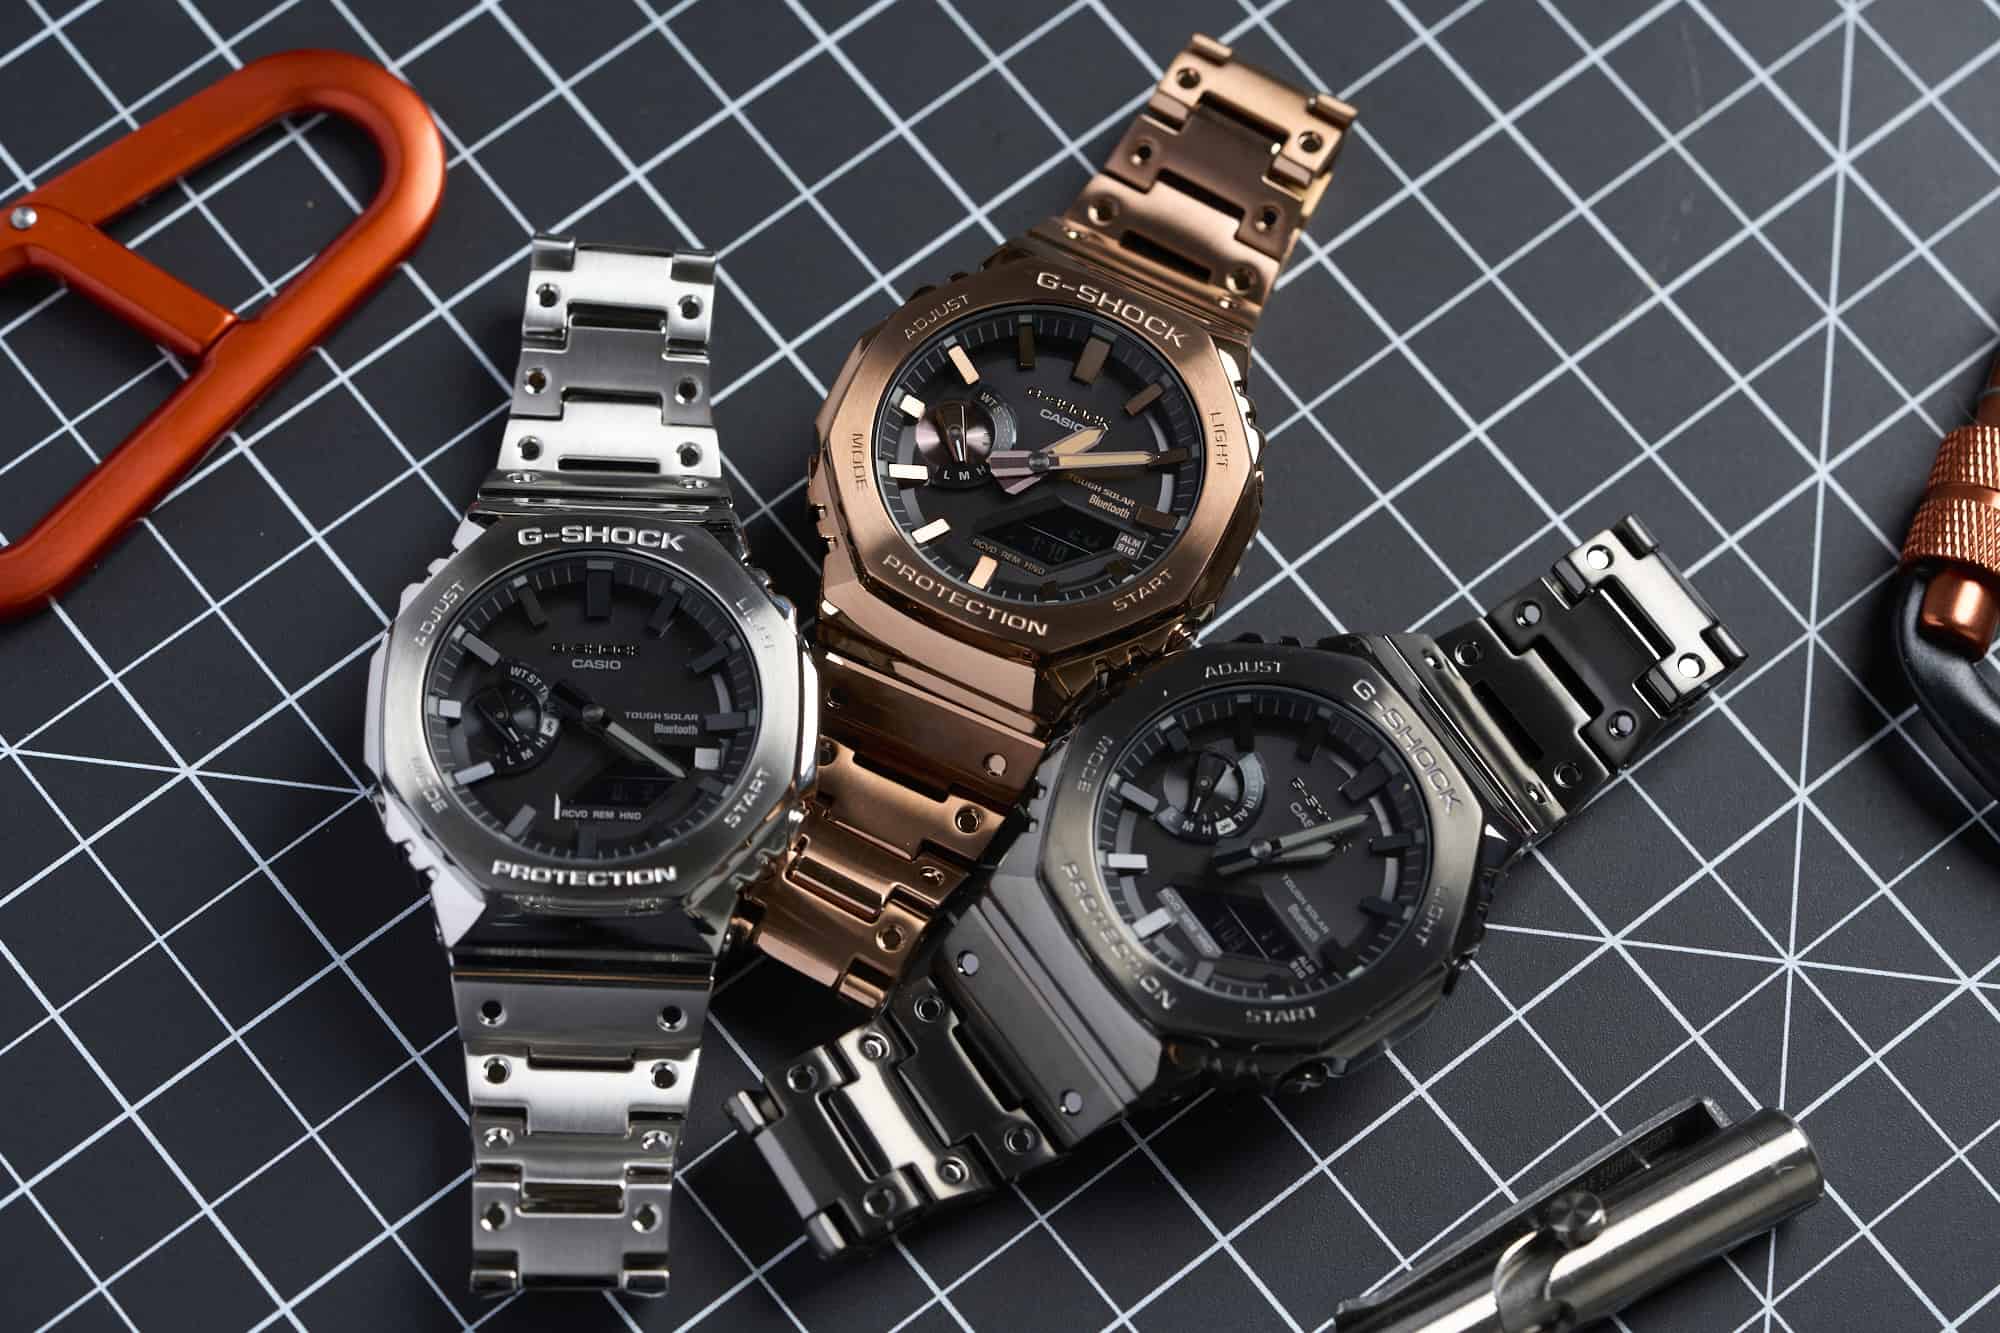 Worn & Wound - Going Full Metal with G-SHOCK's Latest GMB2100's